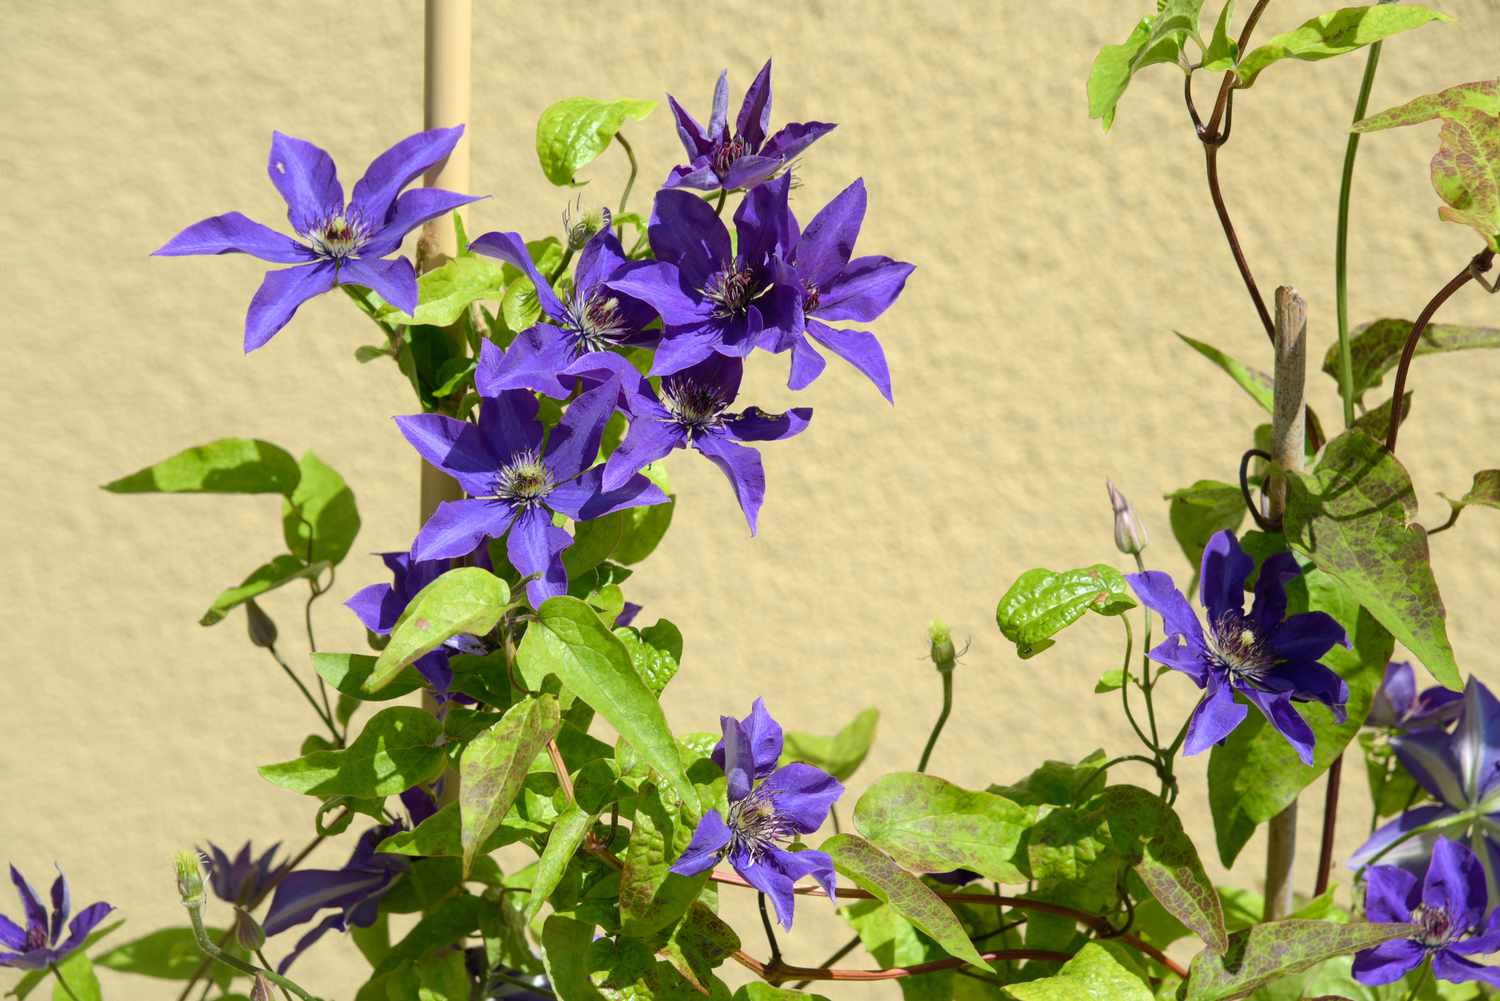 Clematis 'The President' plant with violet-blue flowers growing on bright green vine in sunlight